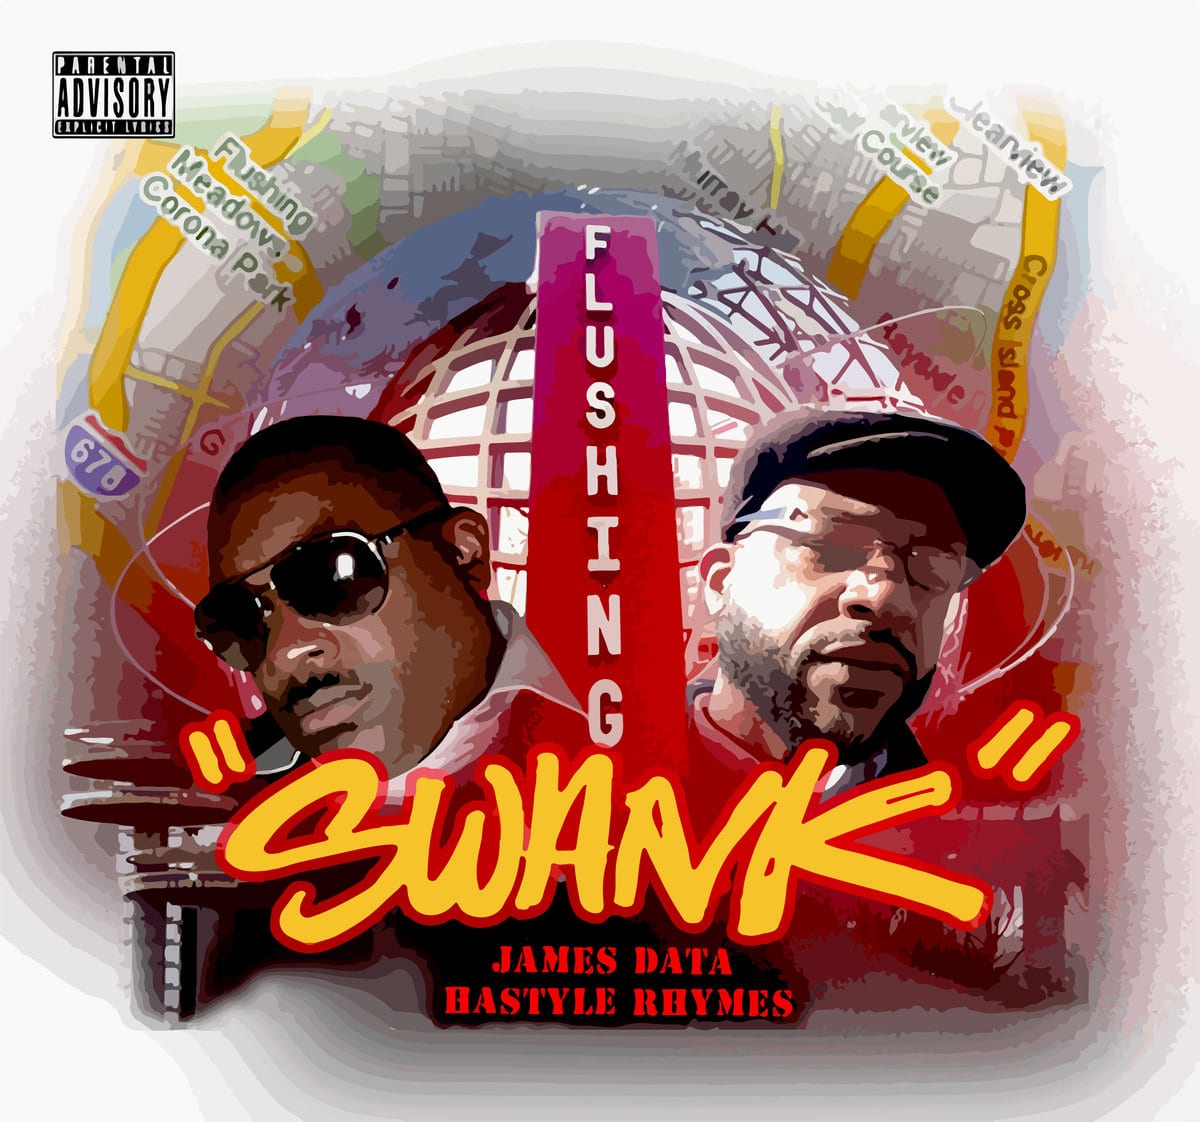 James Data Drops New Single - "Swank" Ft. Hastyle Rhymes